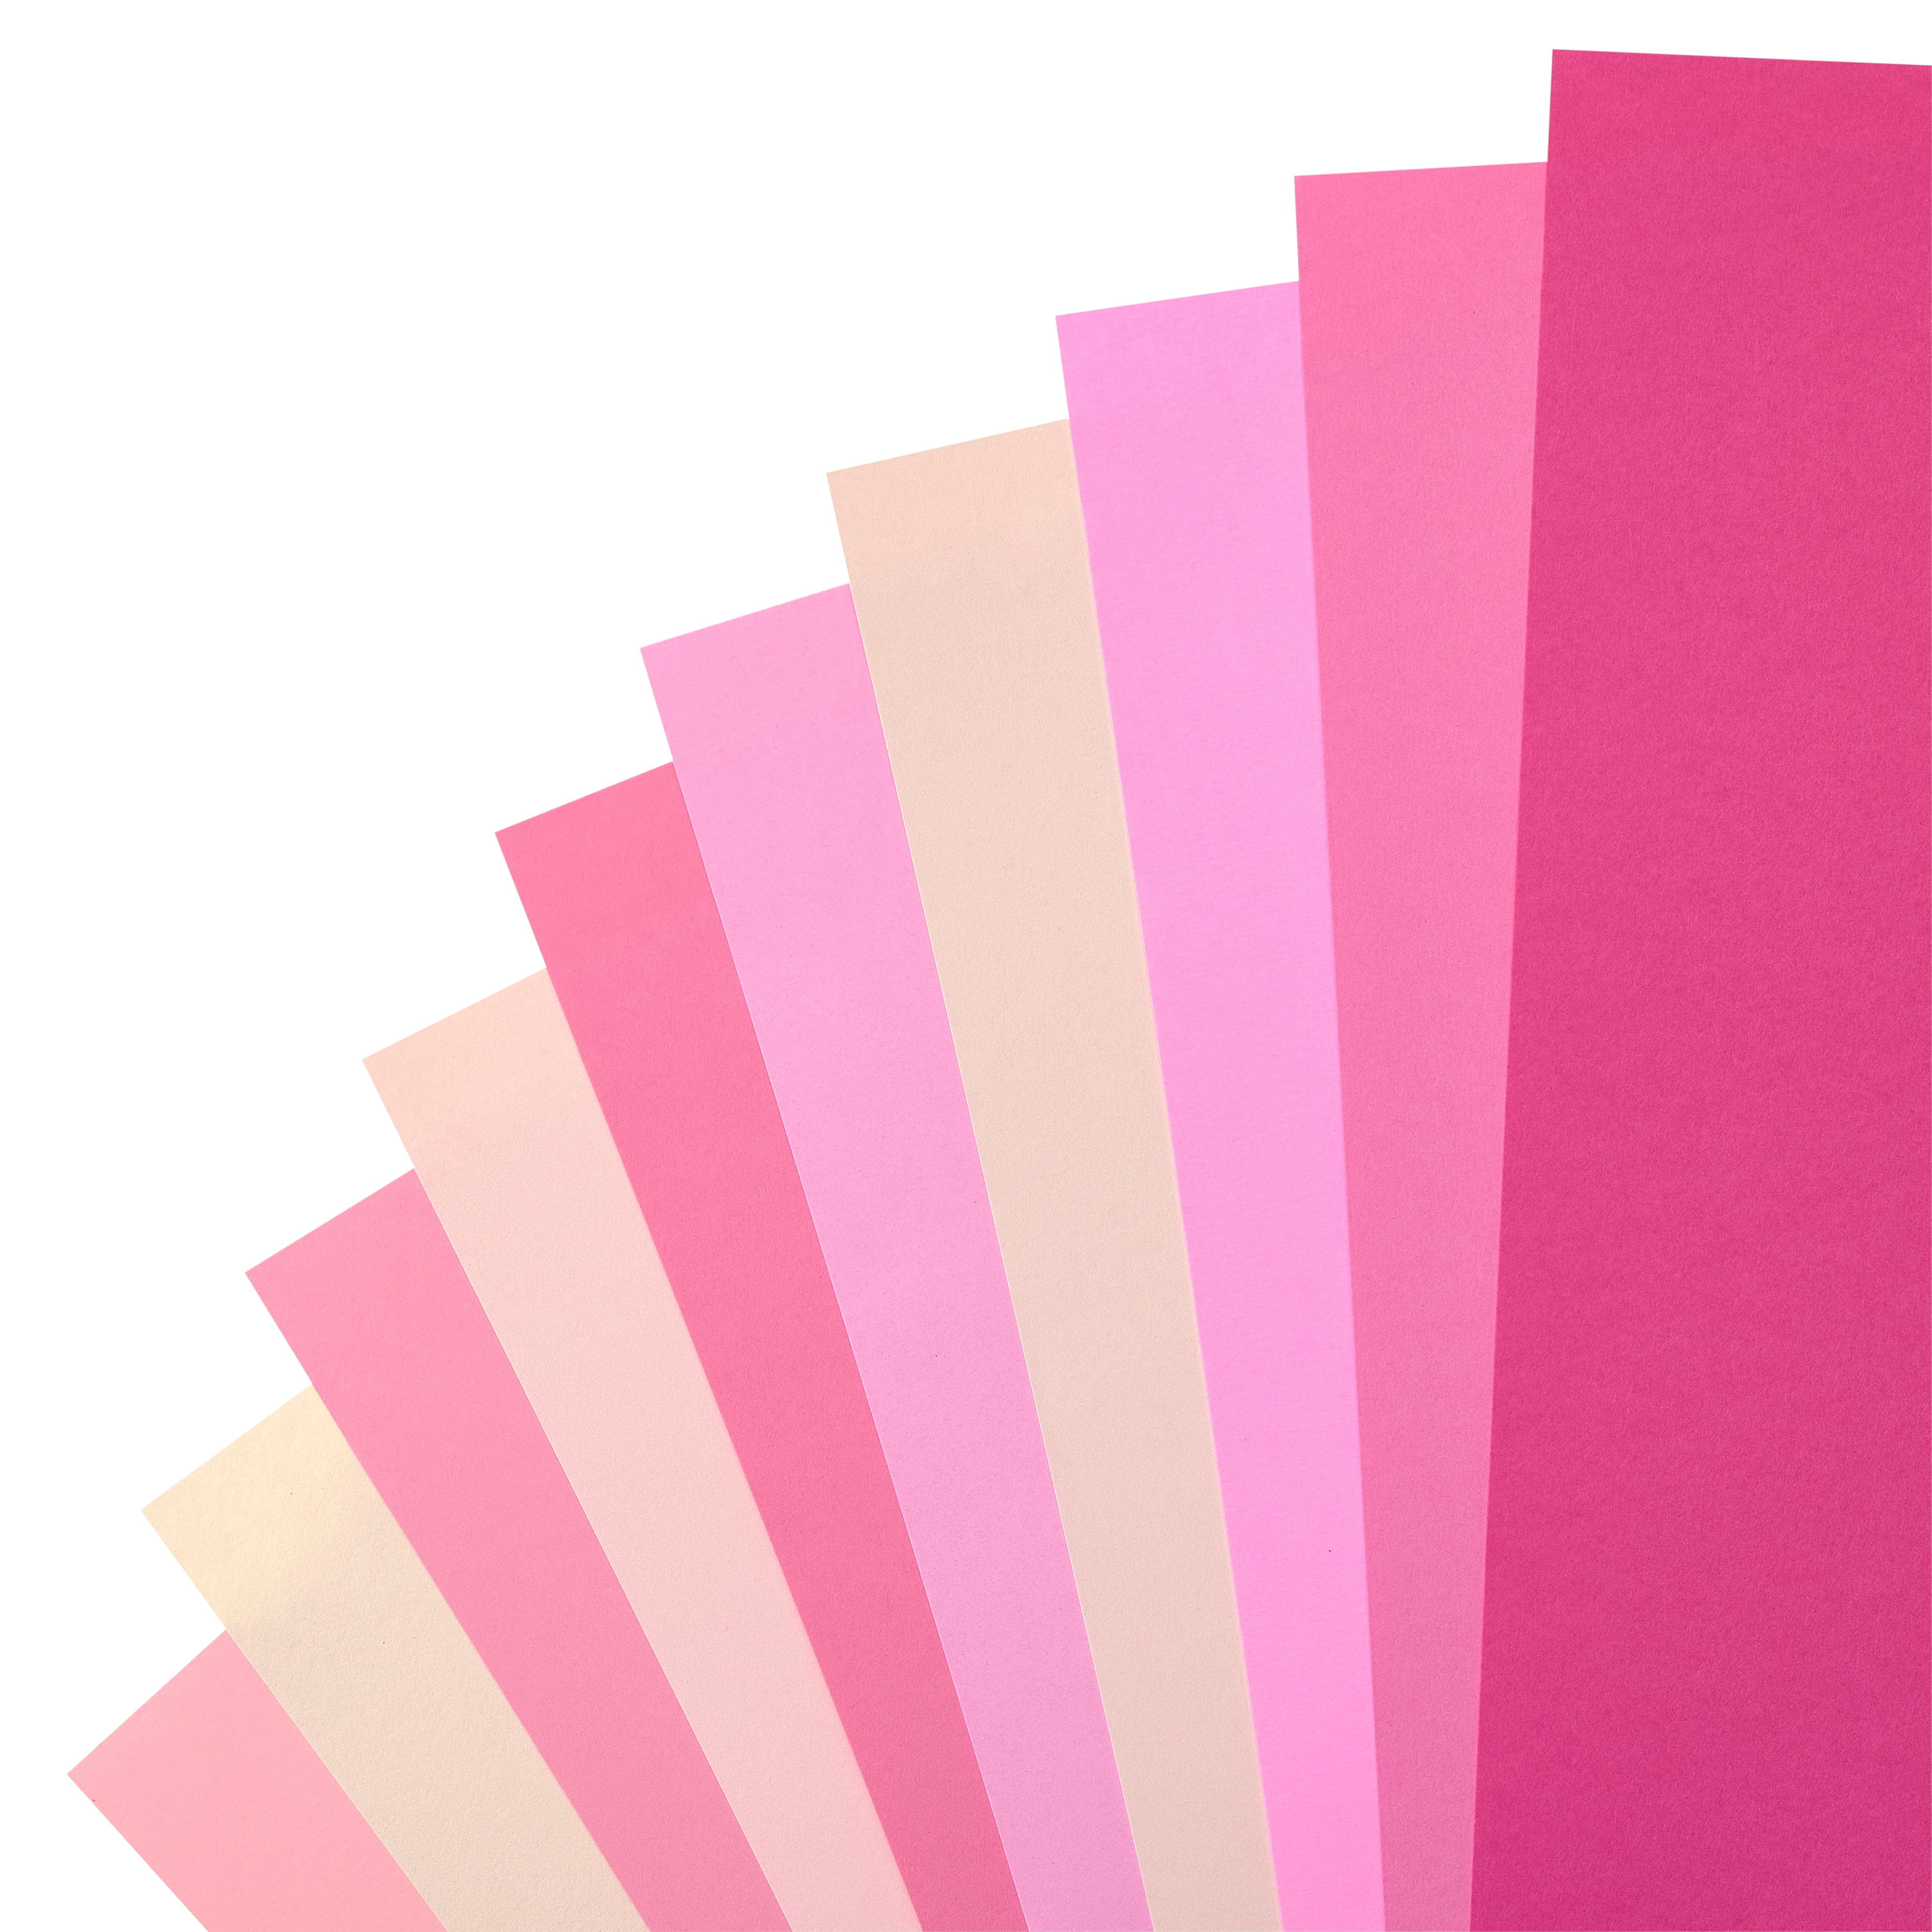 Pink Buttons 4.5 x 7 Cardstock Paper by Recollections 100 Sheets | Michaels